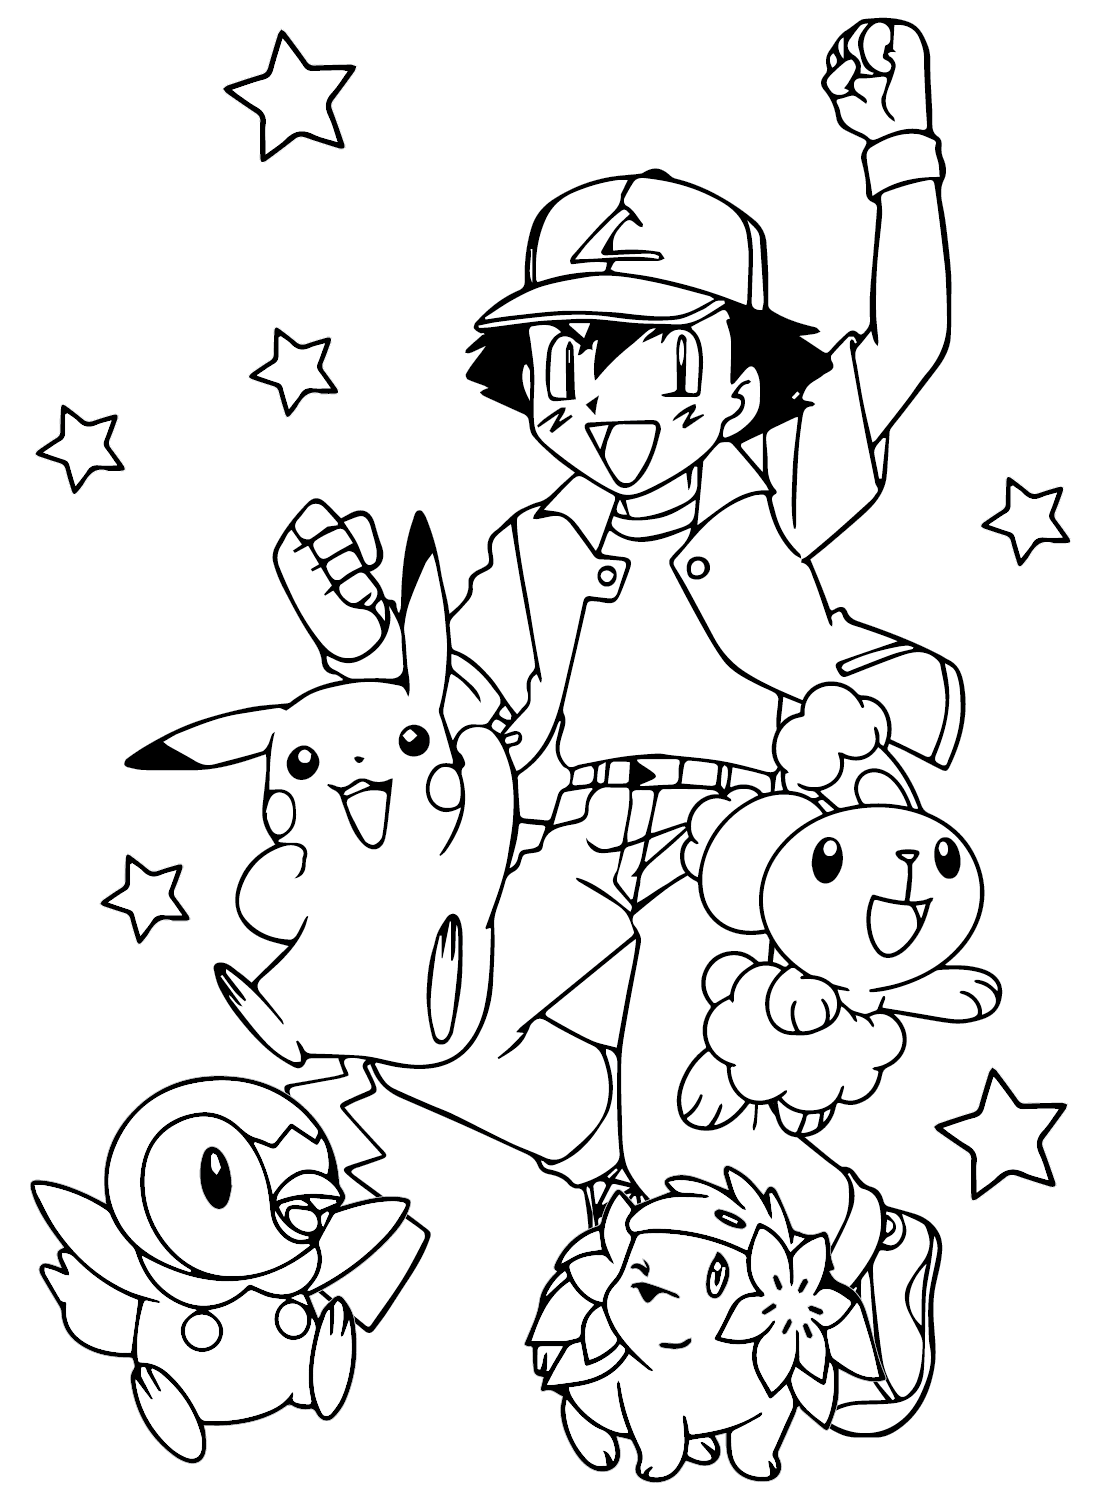 Ash Ketchum Coloring Pages to Download from Ash Ketchum